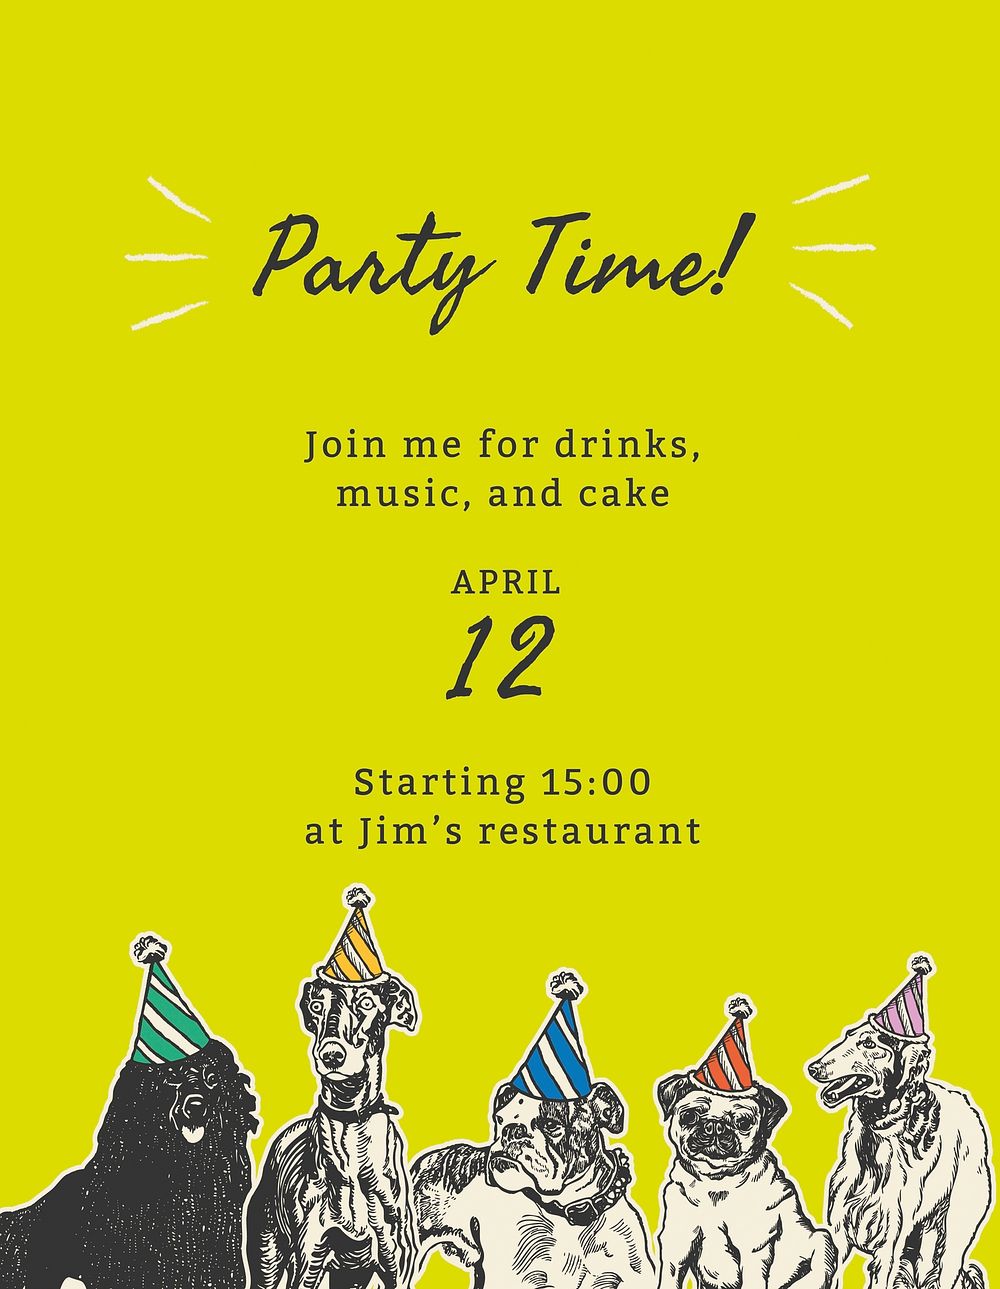 Editable party flyer template vector with quote, Party time, remixed from artworks by Moriz Jung